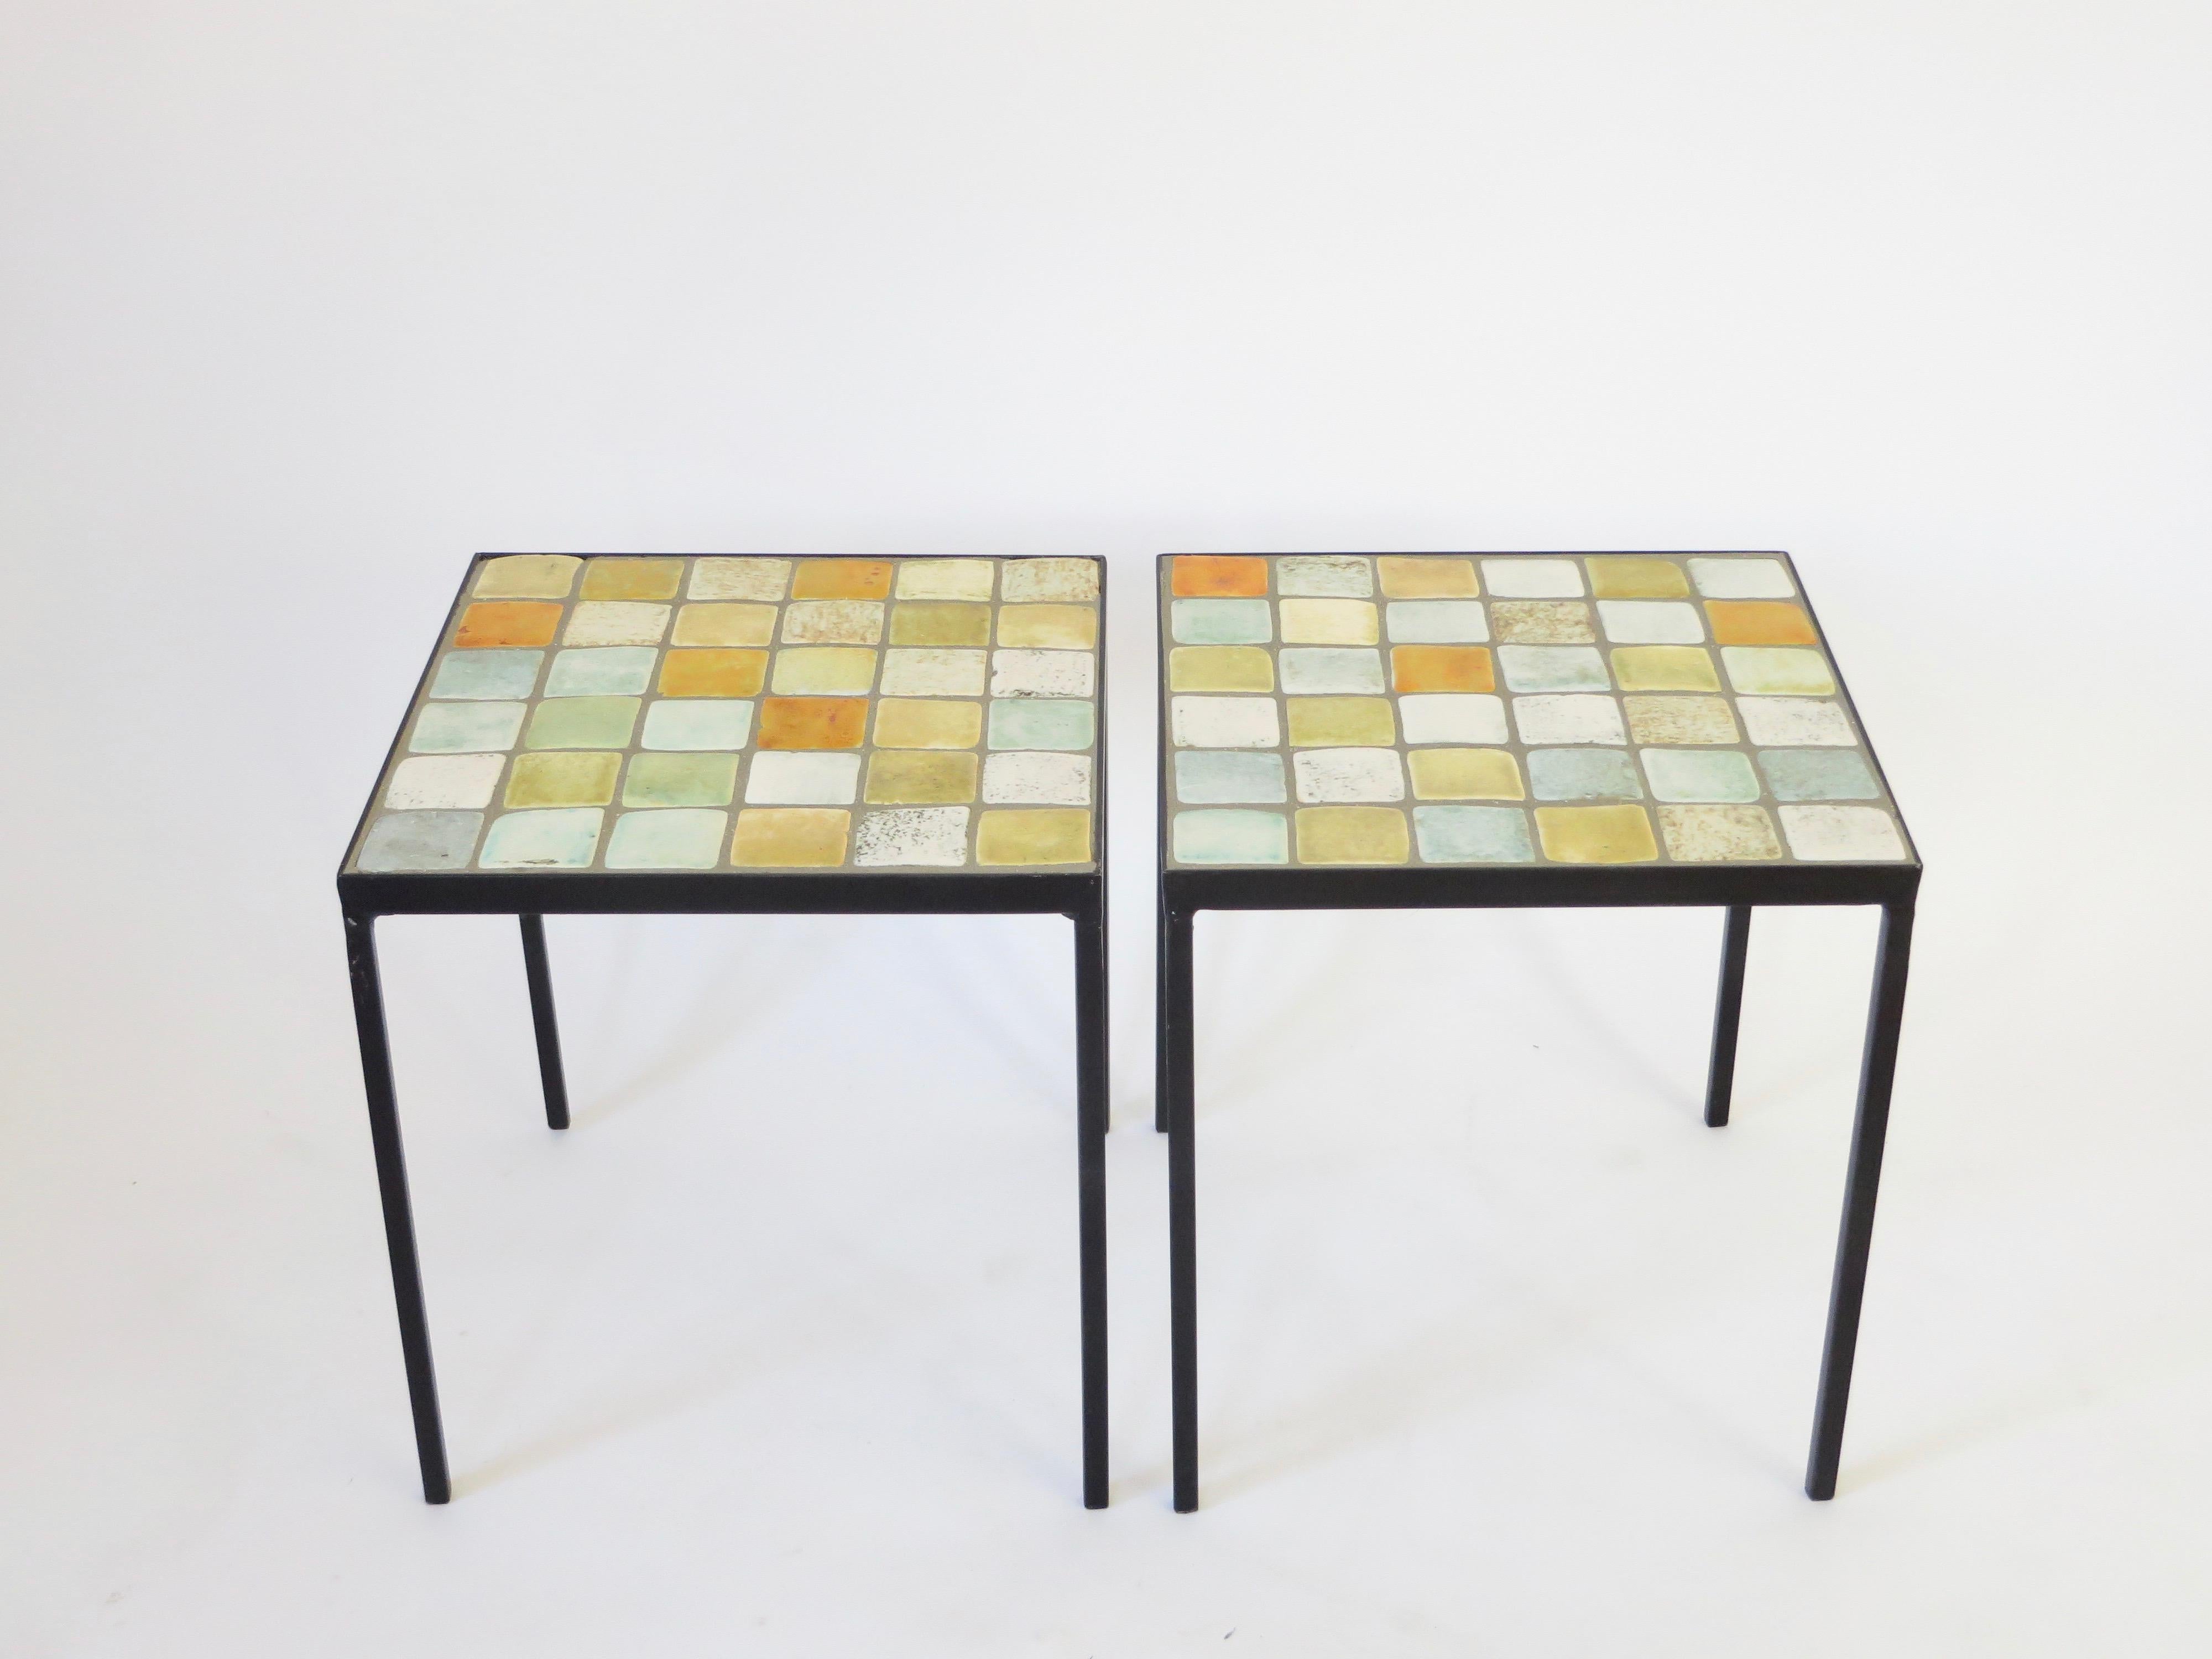 Colorful glazed ceramic tile end or side table with metal table base by French ceramic artists Les 2 Potiers.
Jacques and Michelle Serre.
Small square multi-color tiles compose the tops of the table and have a black iron frame,
circa